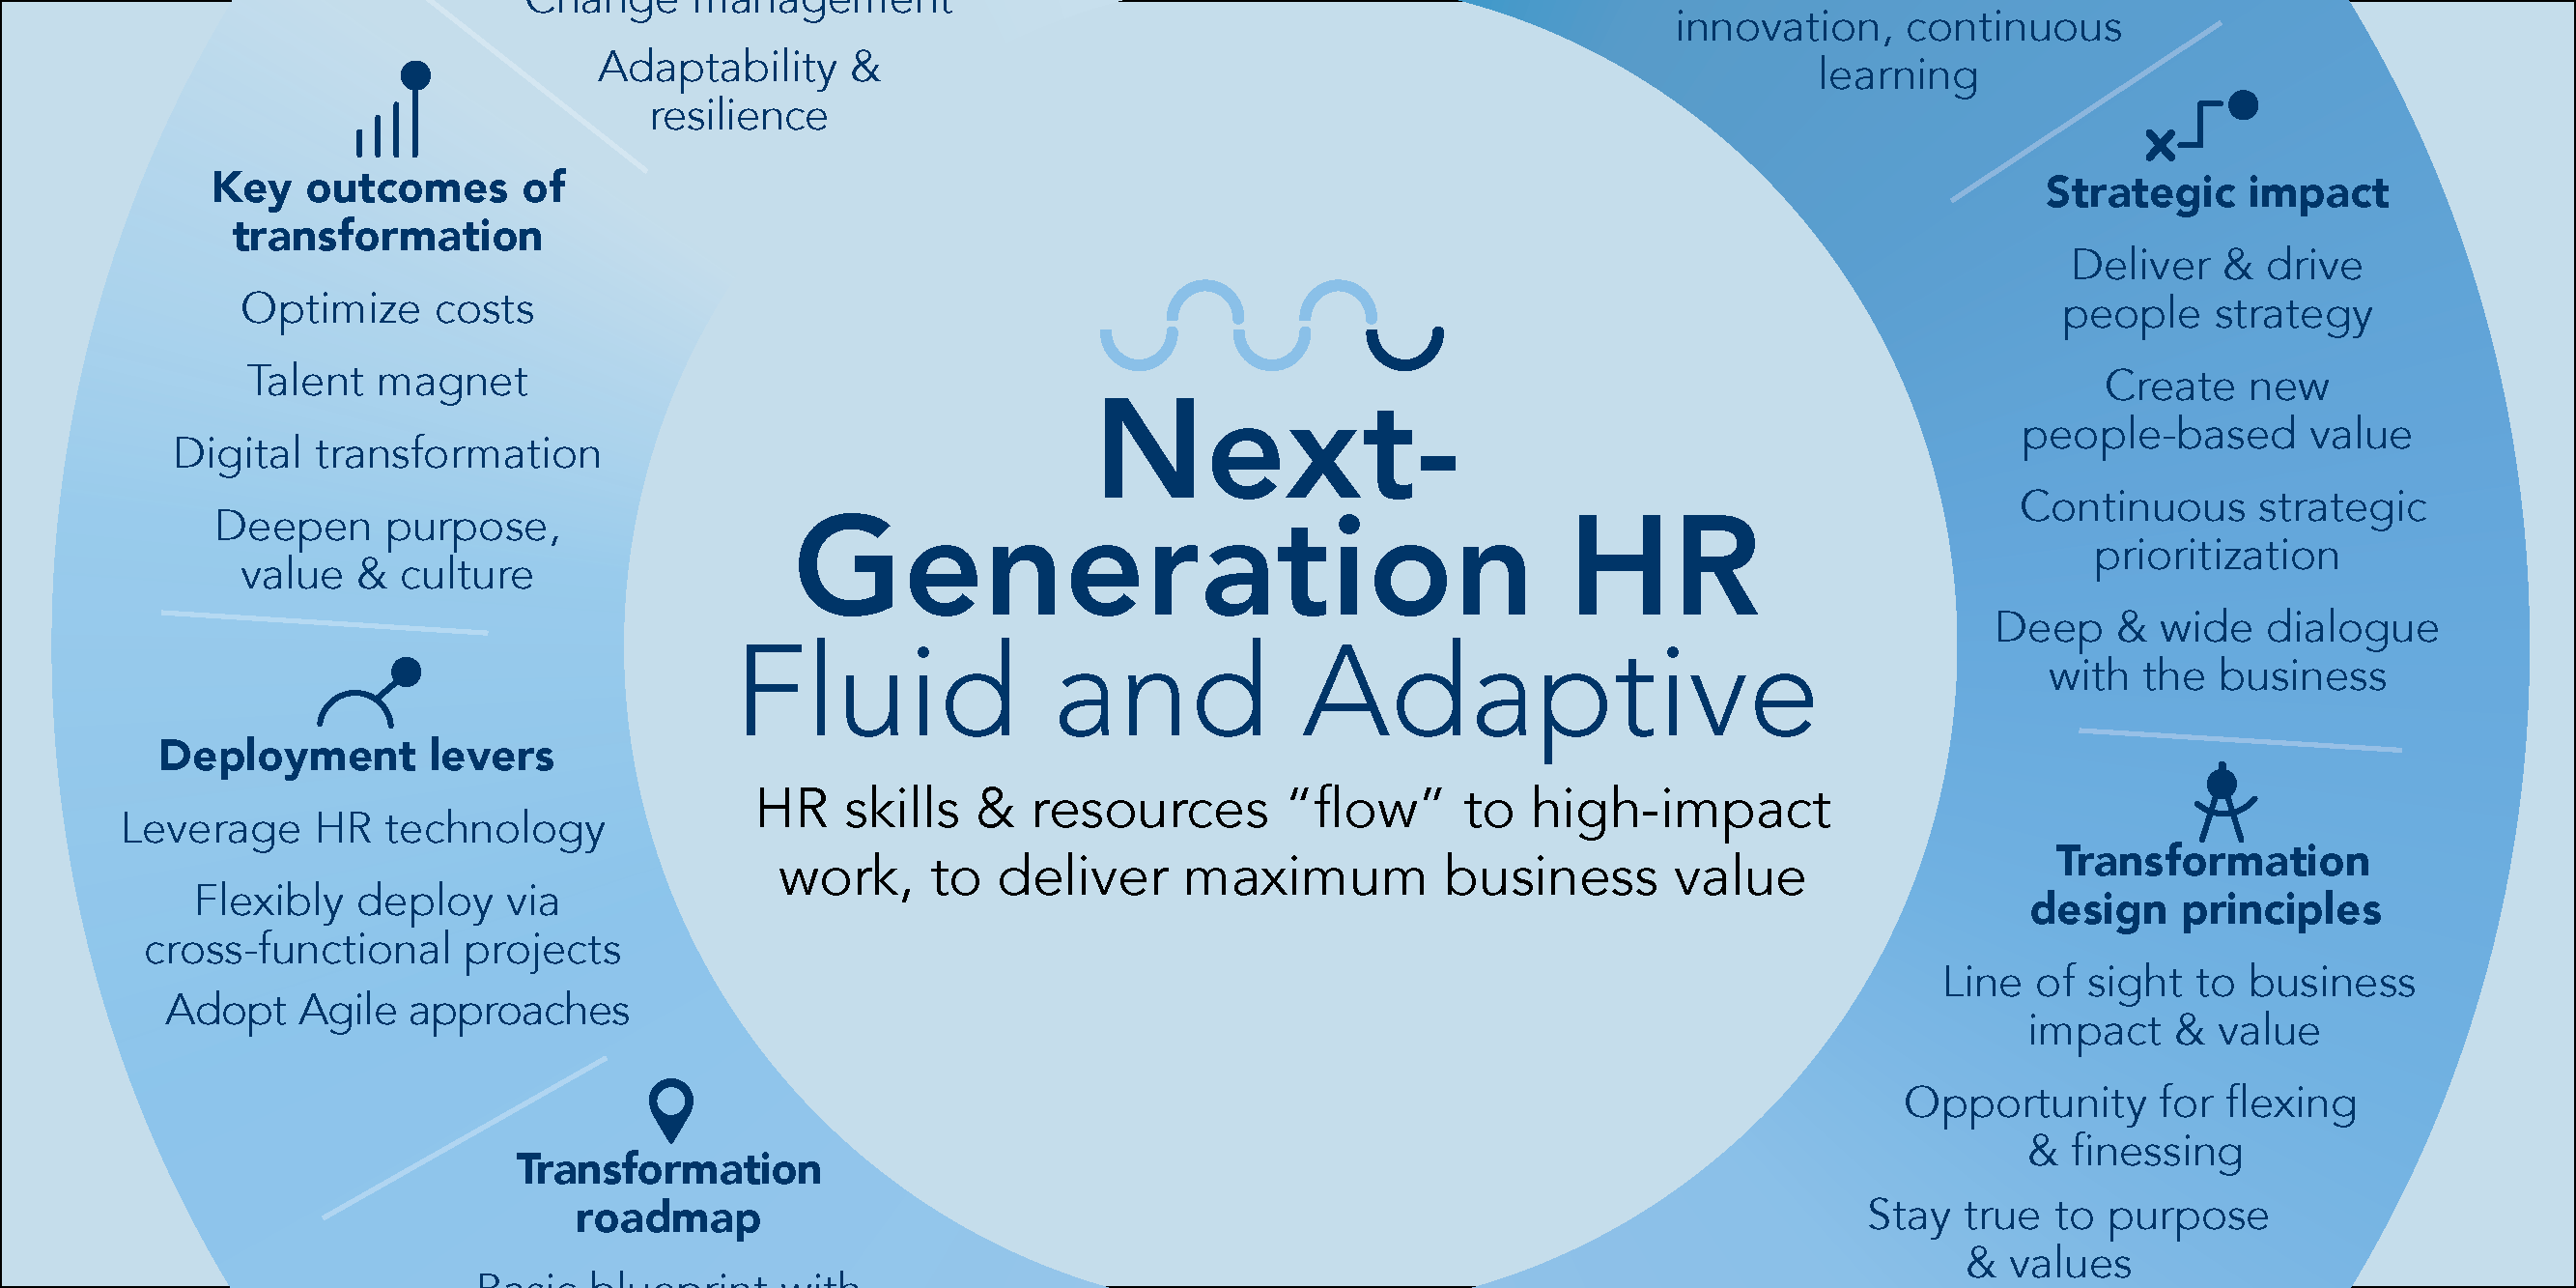 NEXT GENERATION HR Holding Strategic Conversations With the Business